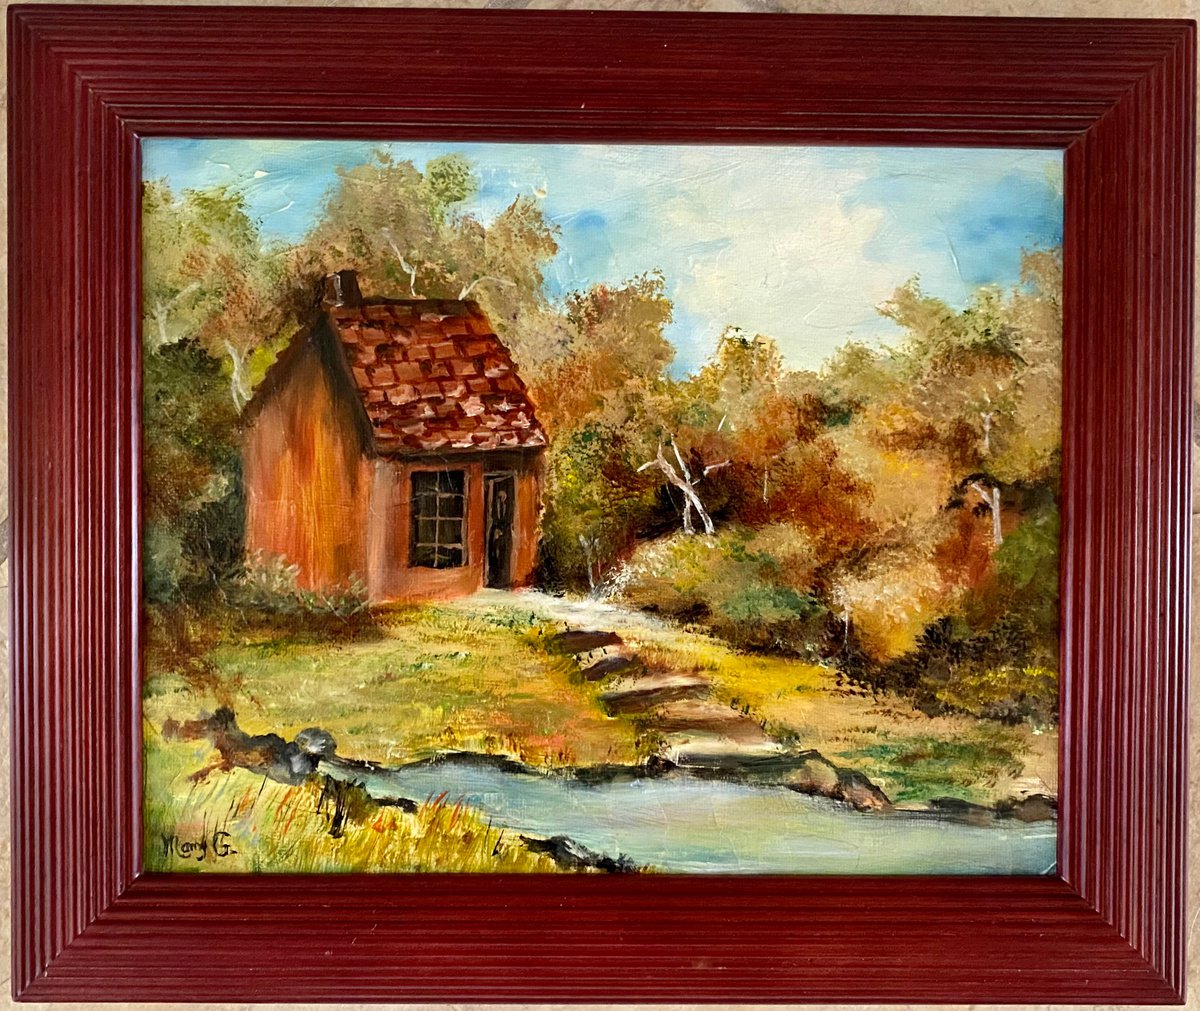 Vintage Old Cabin Original Oil Painting 8x10 Burgundy Frame by Mary Gullette